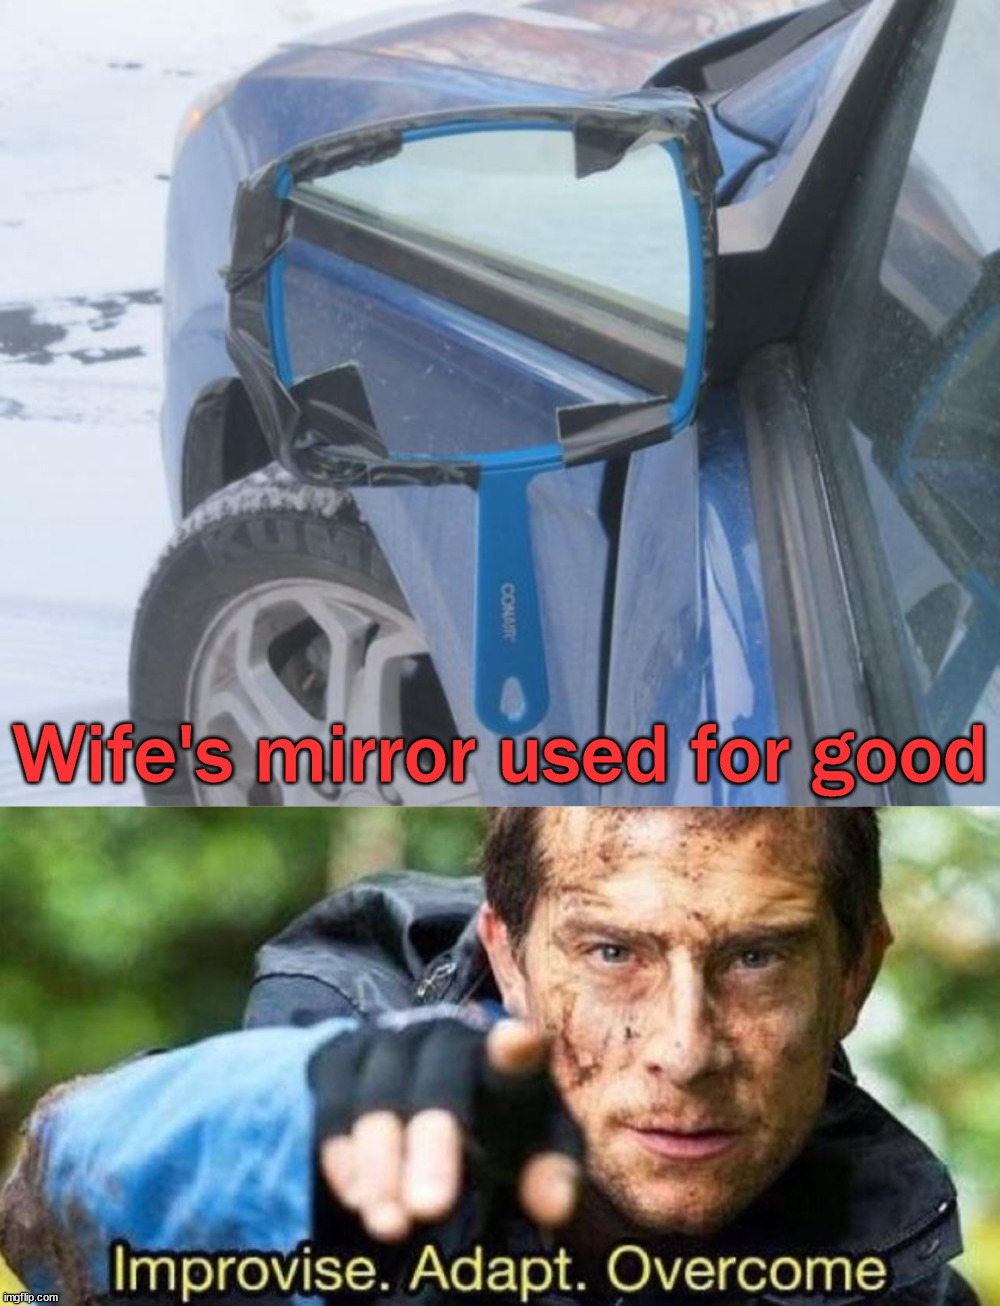  Wife's mirror used for good | image tagged in improvise adapt overcome | made w/ Imgflip meme maker